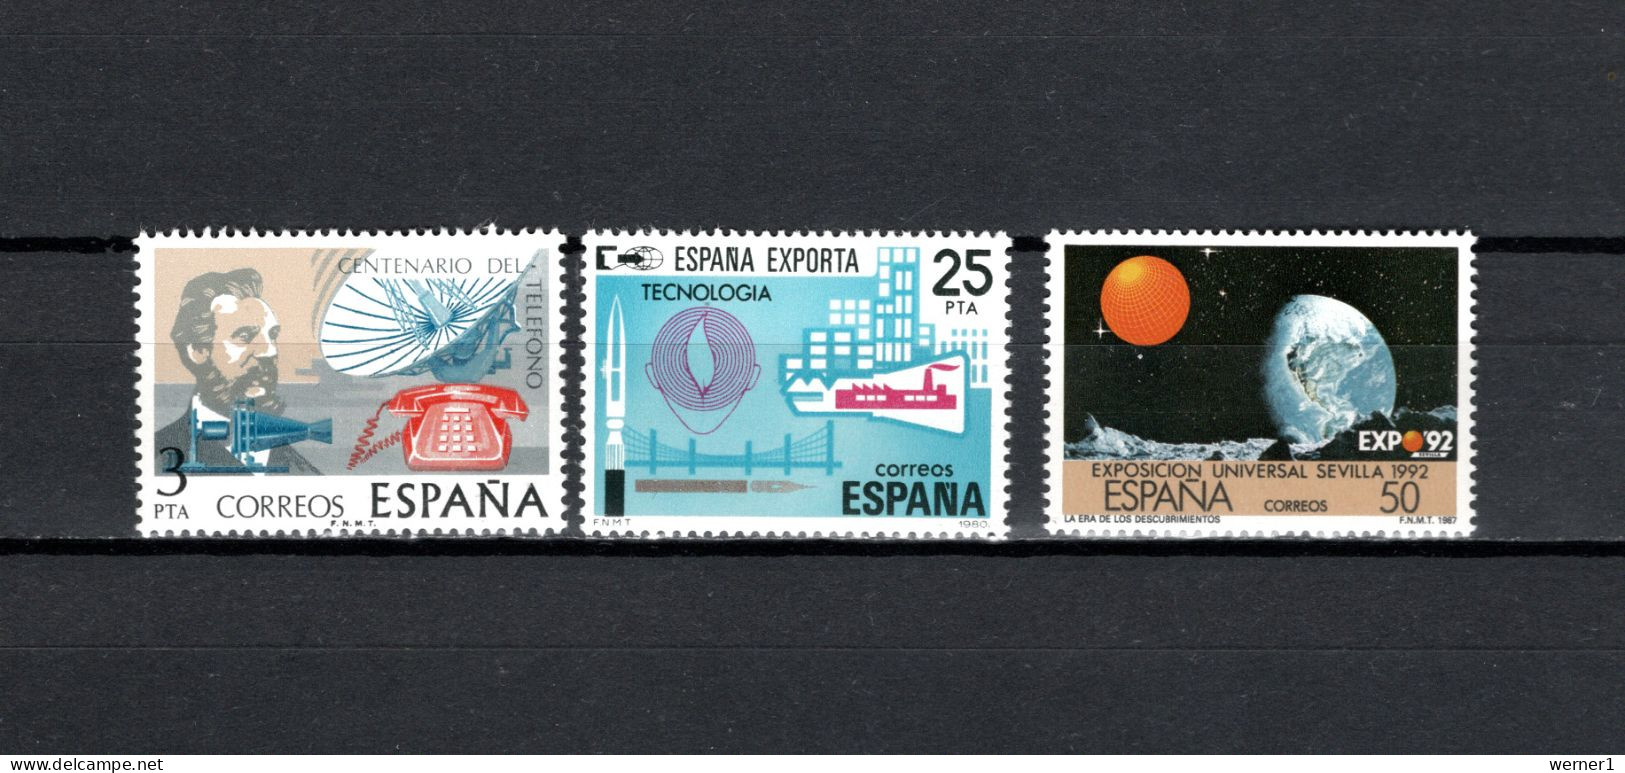 Spain 1976/1987 Space, Telephone Centenary, Technology, Expo Sevilla 3 Stamps MNH - Europa